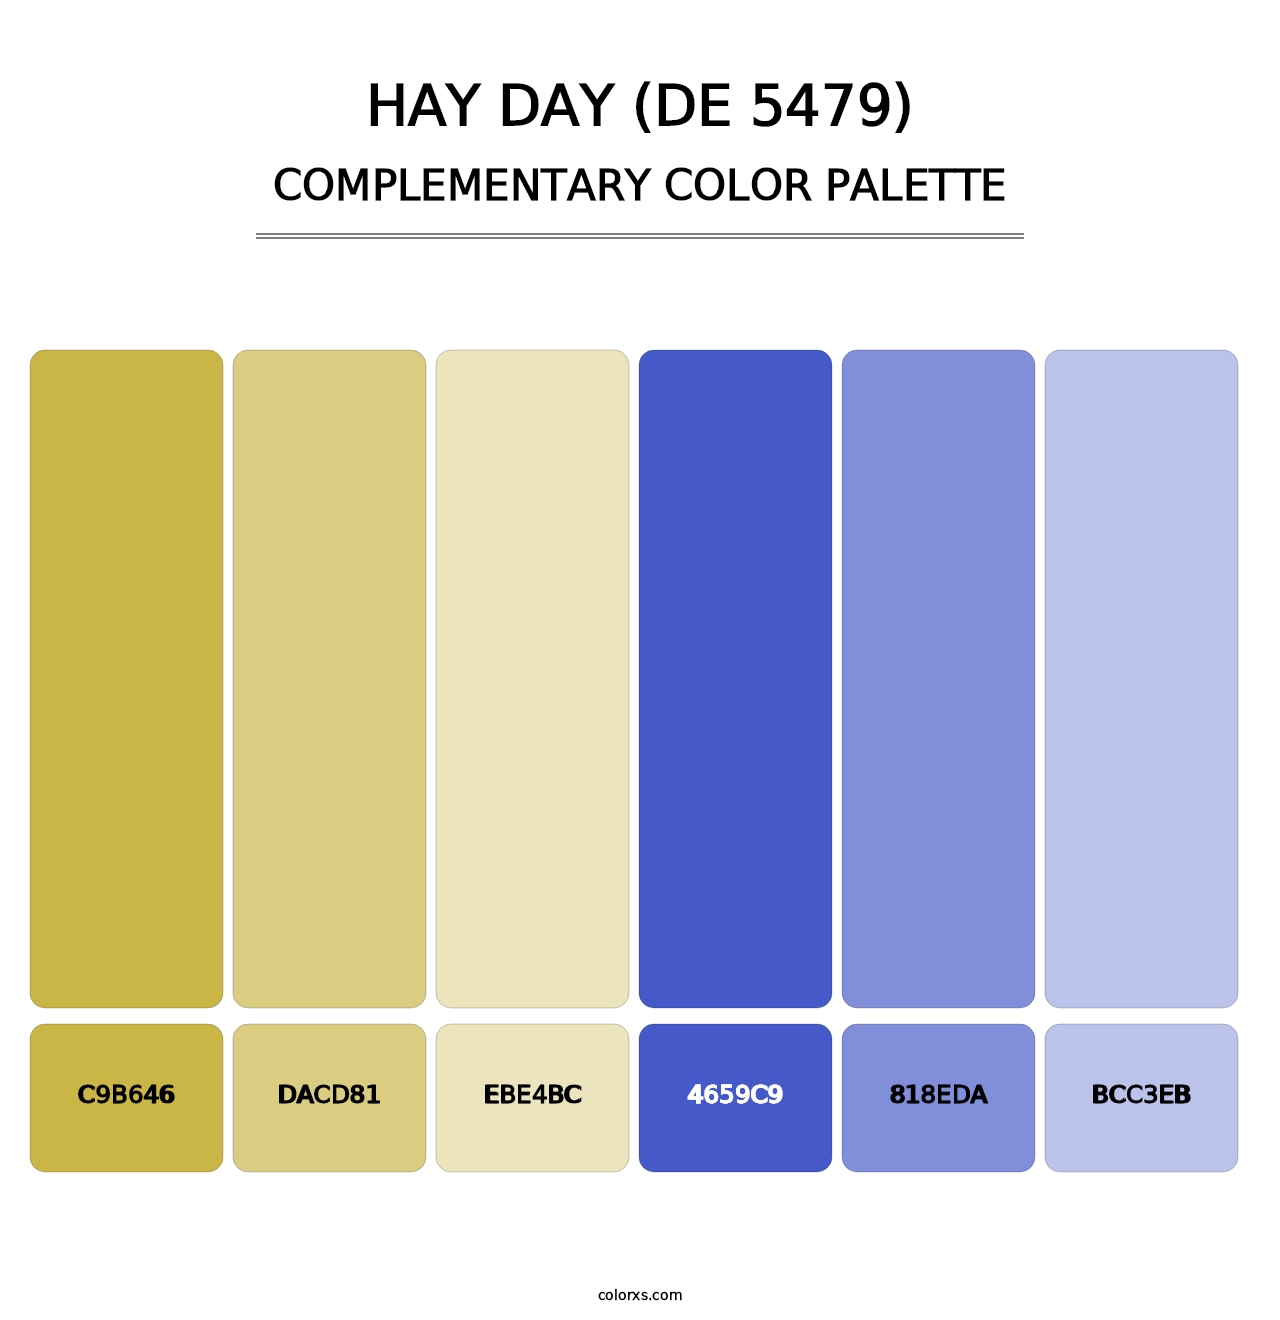 Hay Day (DE 5479) - Complementary Color Palette